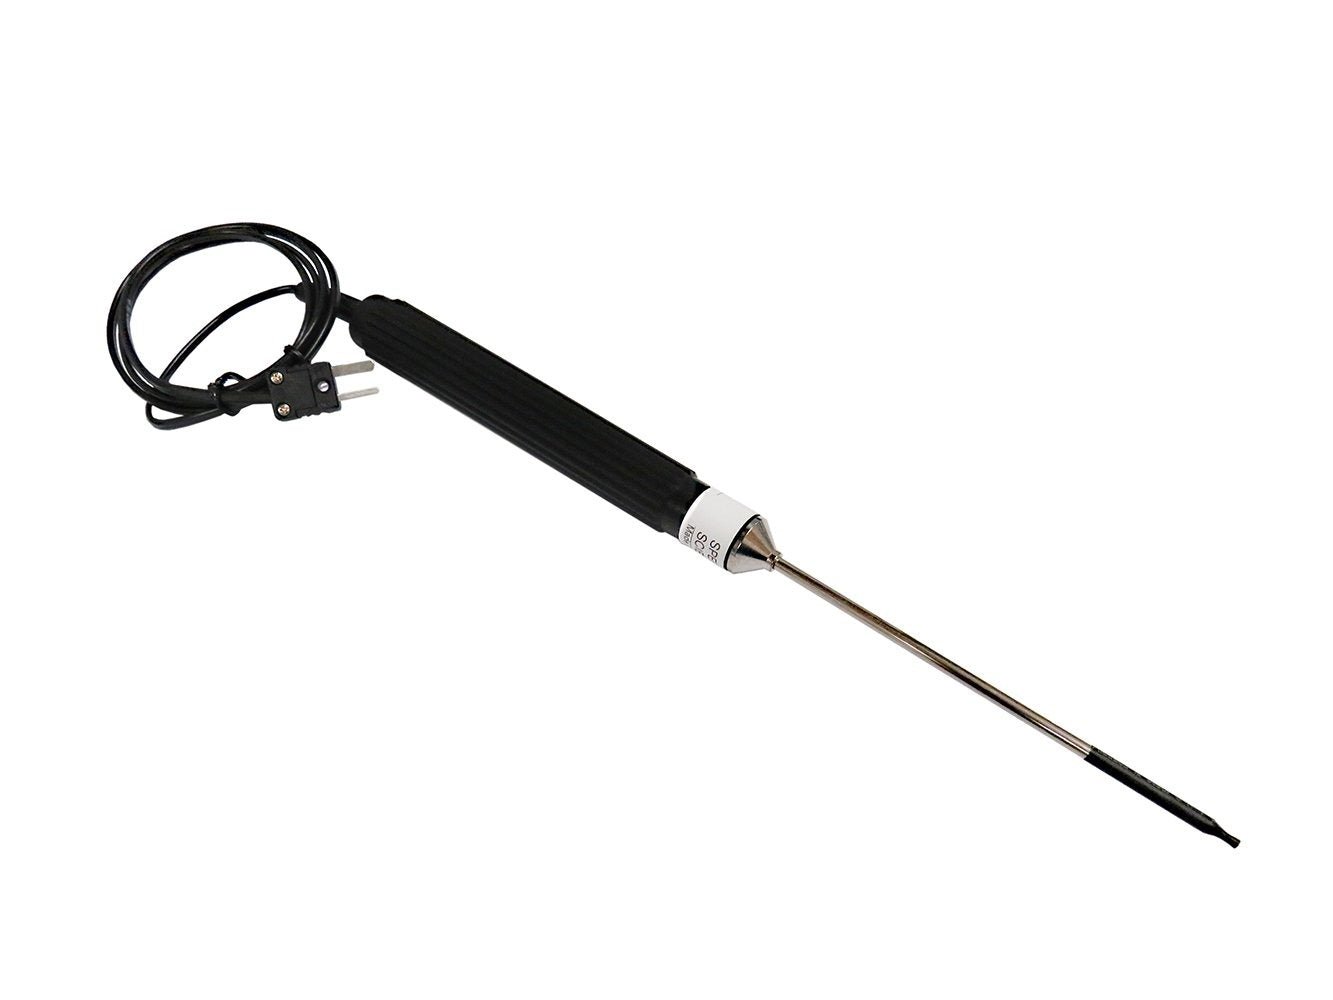 Type K Penetration Thermometer Probe